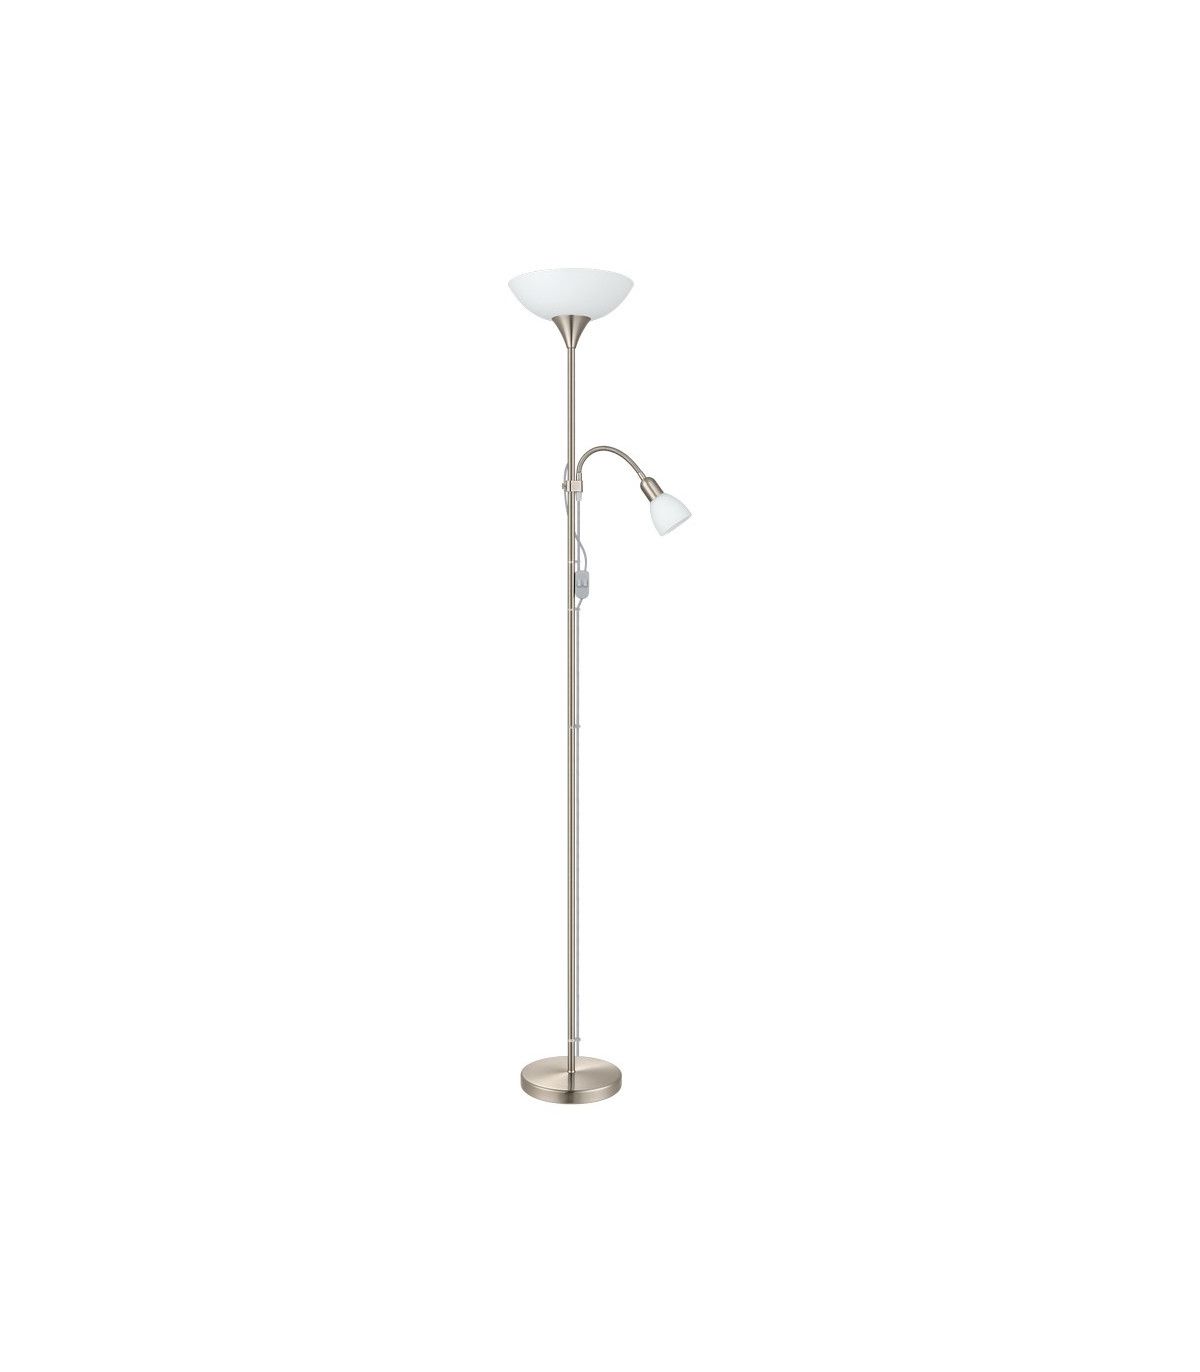 Up 2 Light Traditional Adjustable Floor Lamp Satin Nickel And White Frosted  Glass With Switch | Netlighting.co (View 15 of 15)